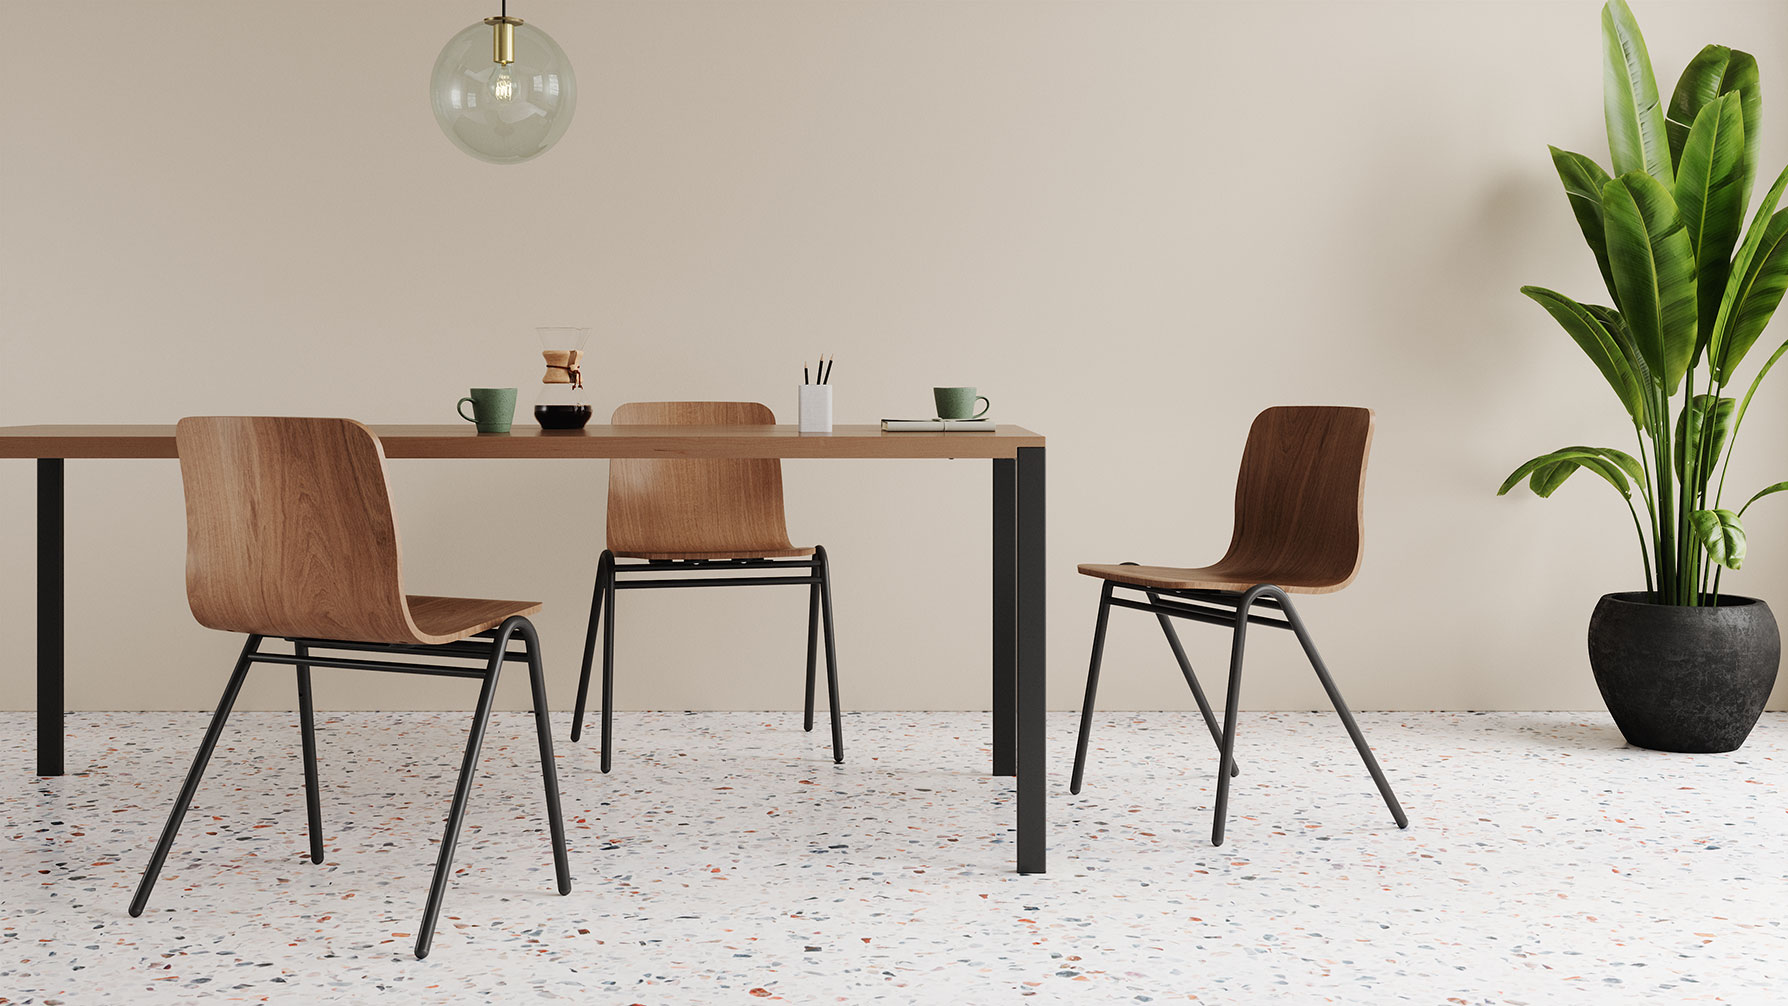 <a href="https://grandrapidschair.com/product/harper-frame-chair/">Harper A-Frame Chair</a> paired with the <a href="https://grandrapidschair.com/product/brady-communal-table/">Brady Communal Table</a> — Featured with an Ink Black metal finish and Acorn wood finish. 